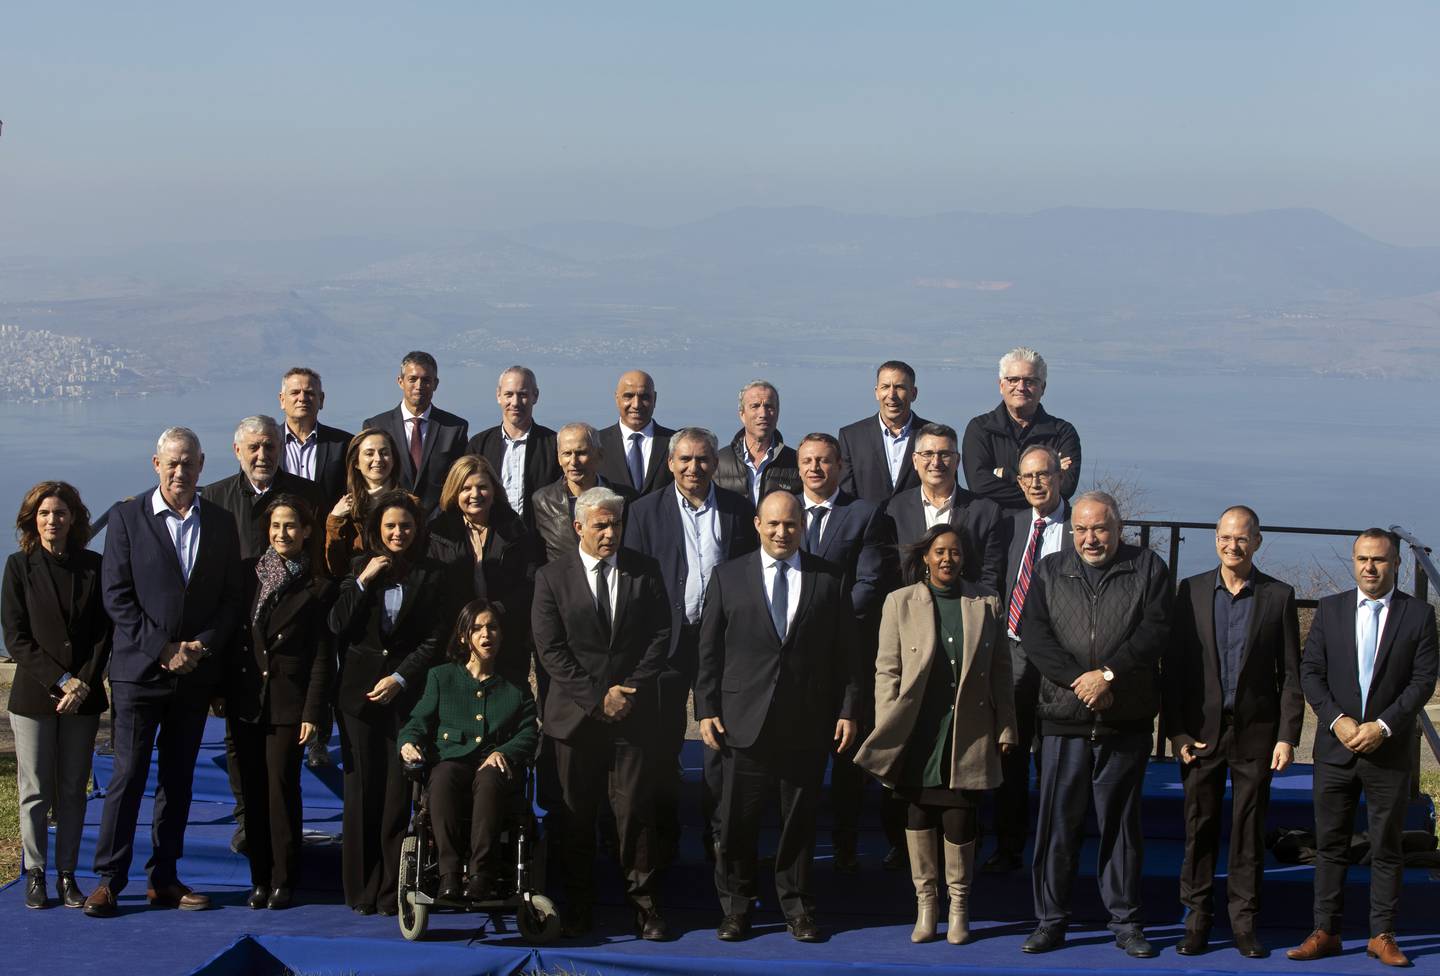 Israeli Prime Minister Naftali Bennett, fifth right front row, poses for a photo with members of the government before a weekly cabinet meeting in Kibbutz Mevo Hama, in the Israeli-occupied Golan Heights, Sunday, Dec. 26, 2021. Bennett said Sunday the country intends to double the amount of settlers living in the Israeli-controlled Golan Heights with a multimillion-dollar plan meant to further consolidate Israel’s hold on the territory it captured from Syria more than five decades ago. (Nir Elias/Pool via AP)